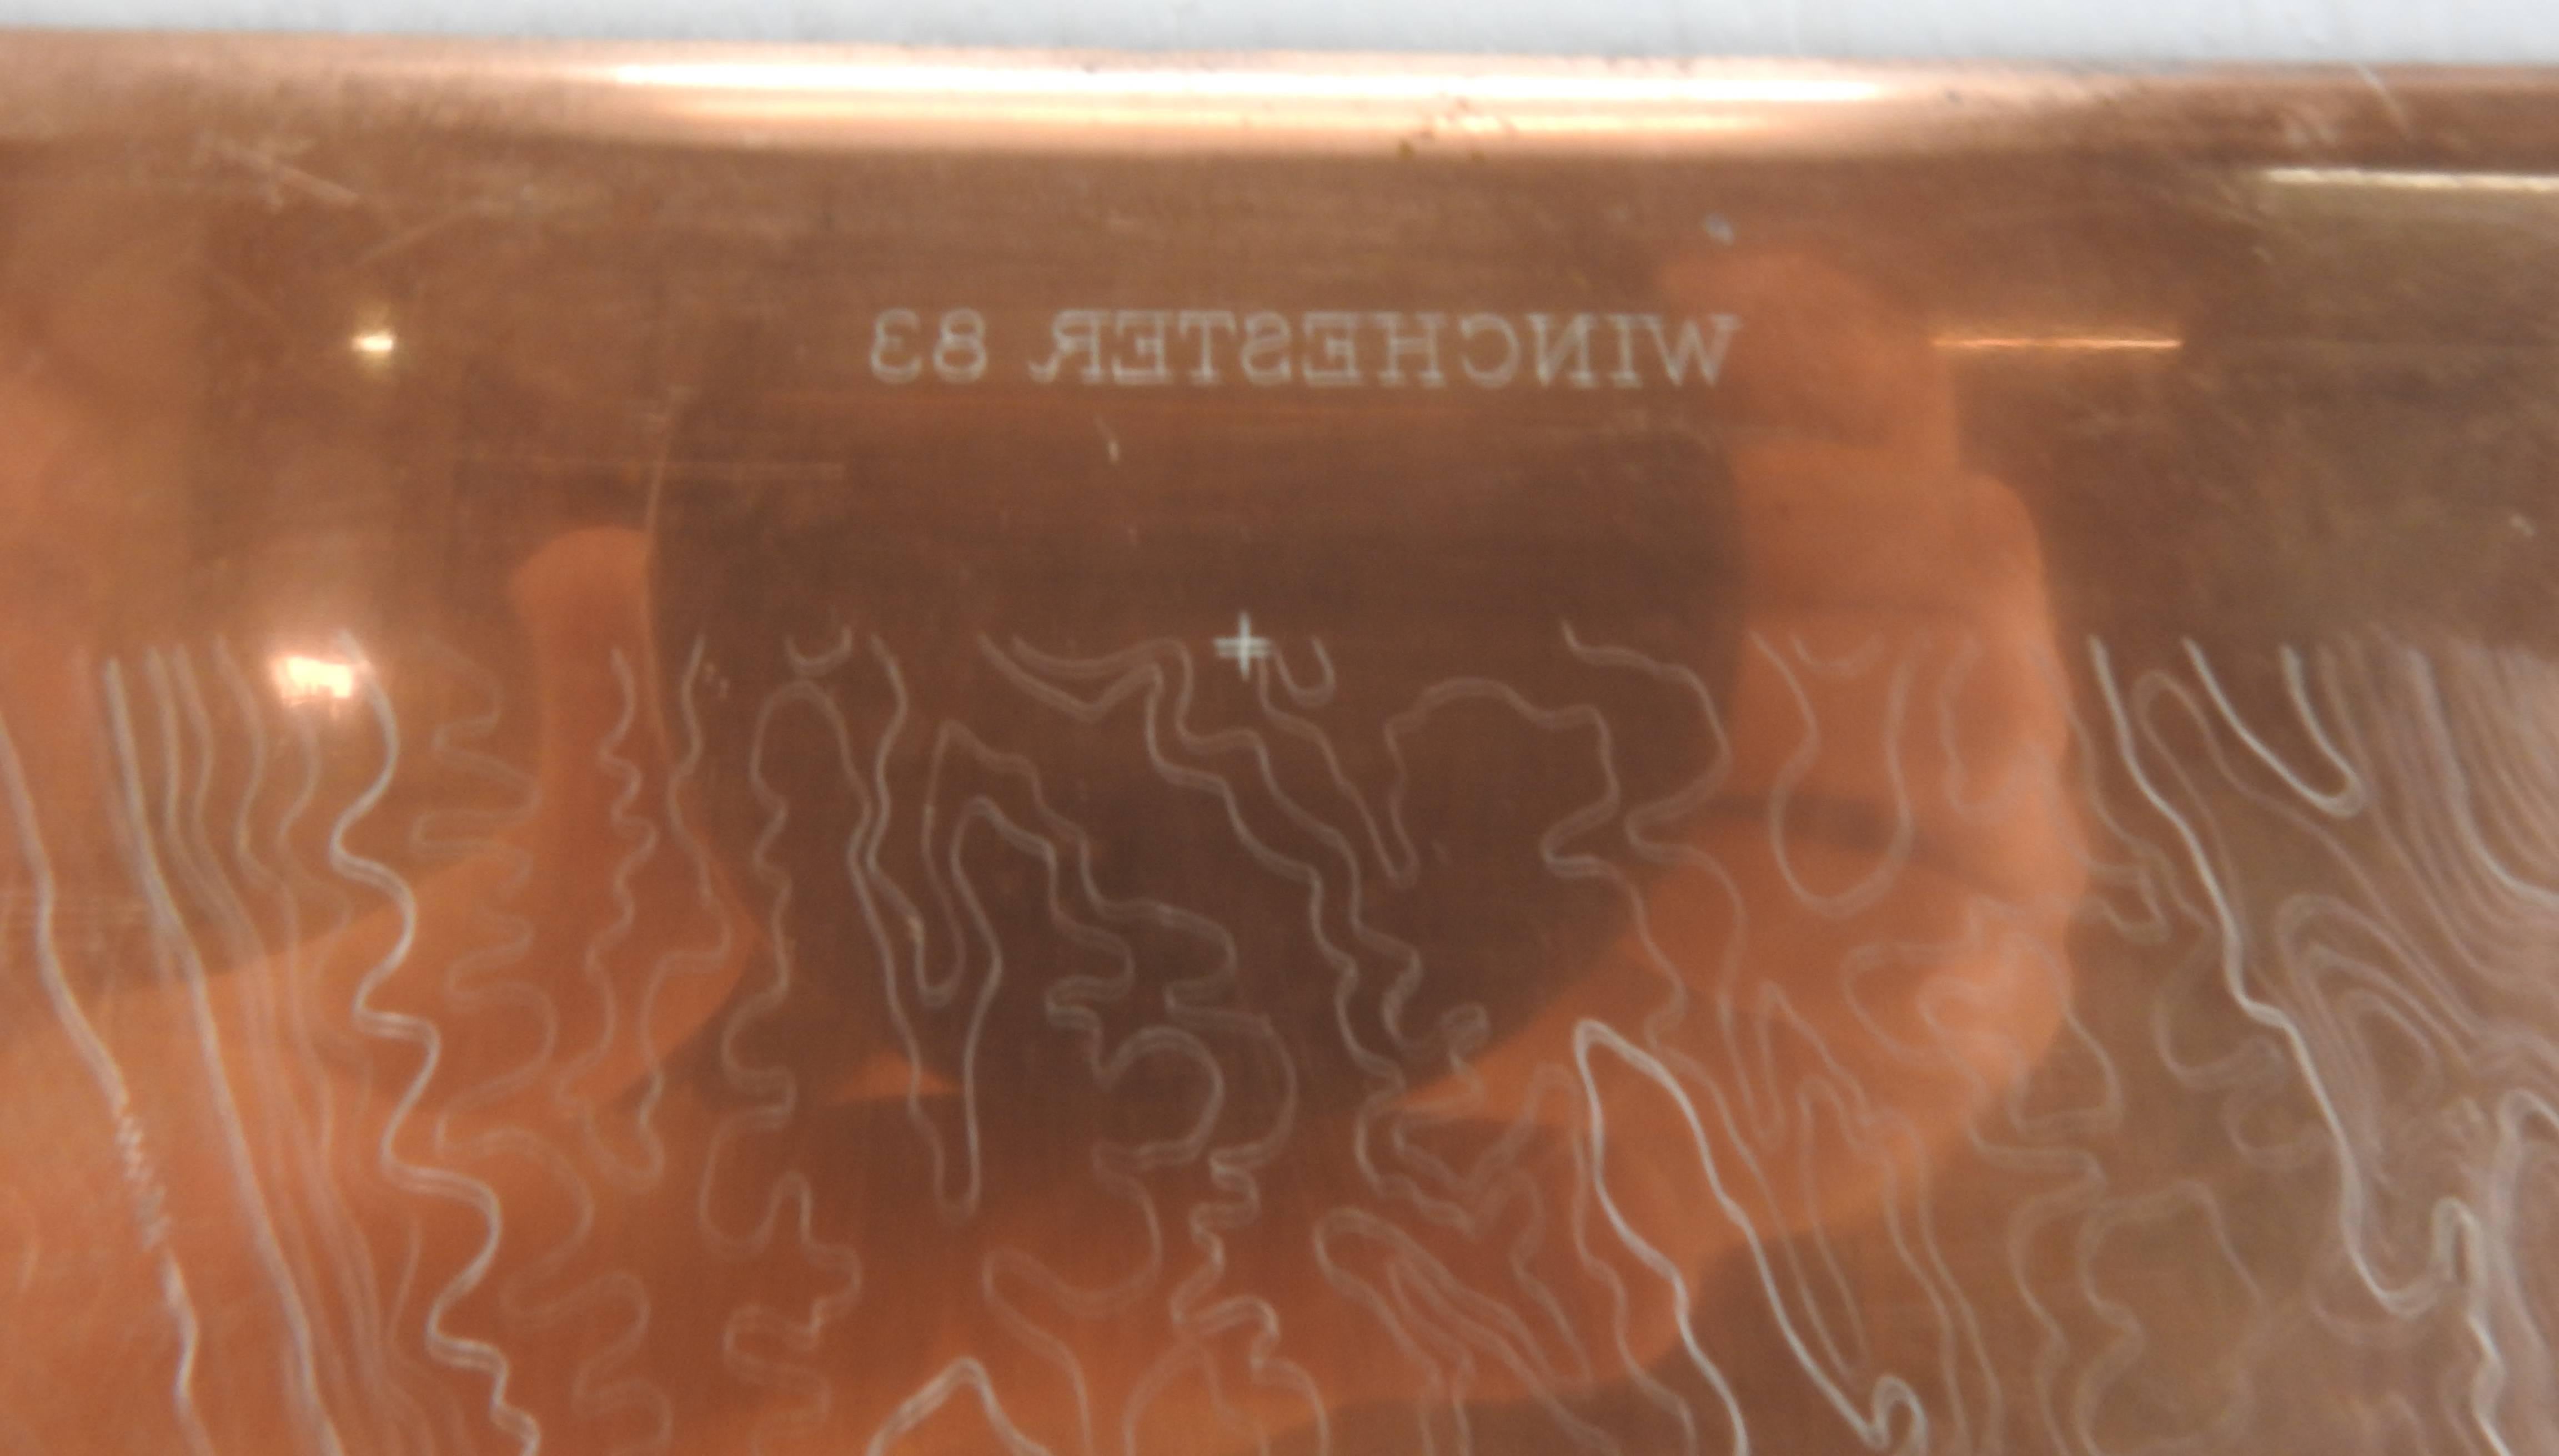 This is a unique antique copper printing plate for Winchester, Virginia. It is a topographical plate. The plate is labeled “Winchester 83” and is presented unframed.